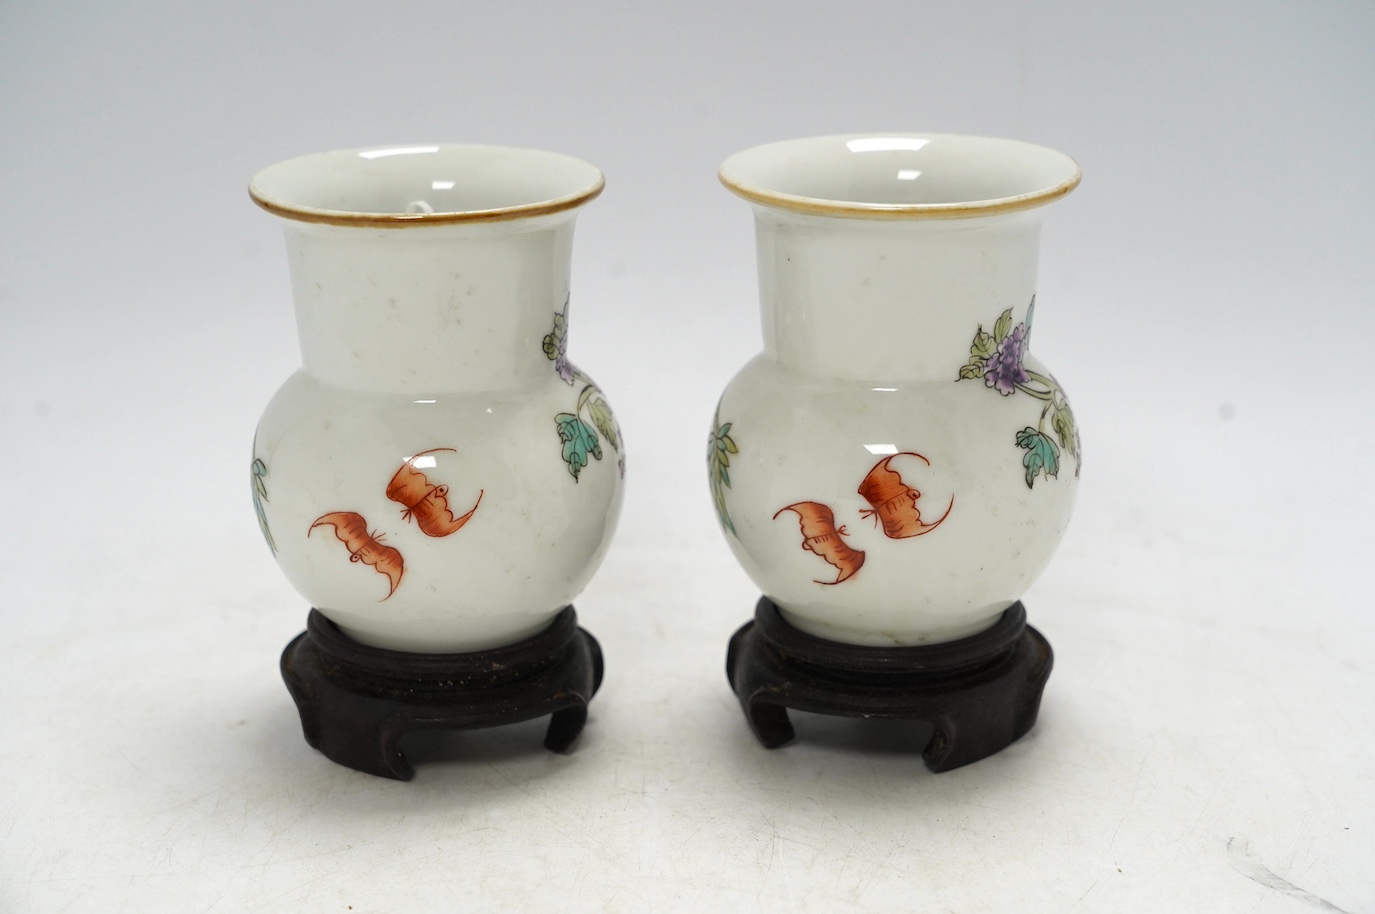 A pair of Chinese famille rose vases, mid 20th century, on wood stands, 10cm high. Condition - good